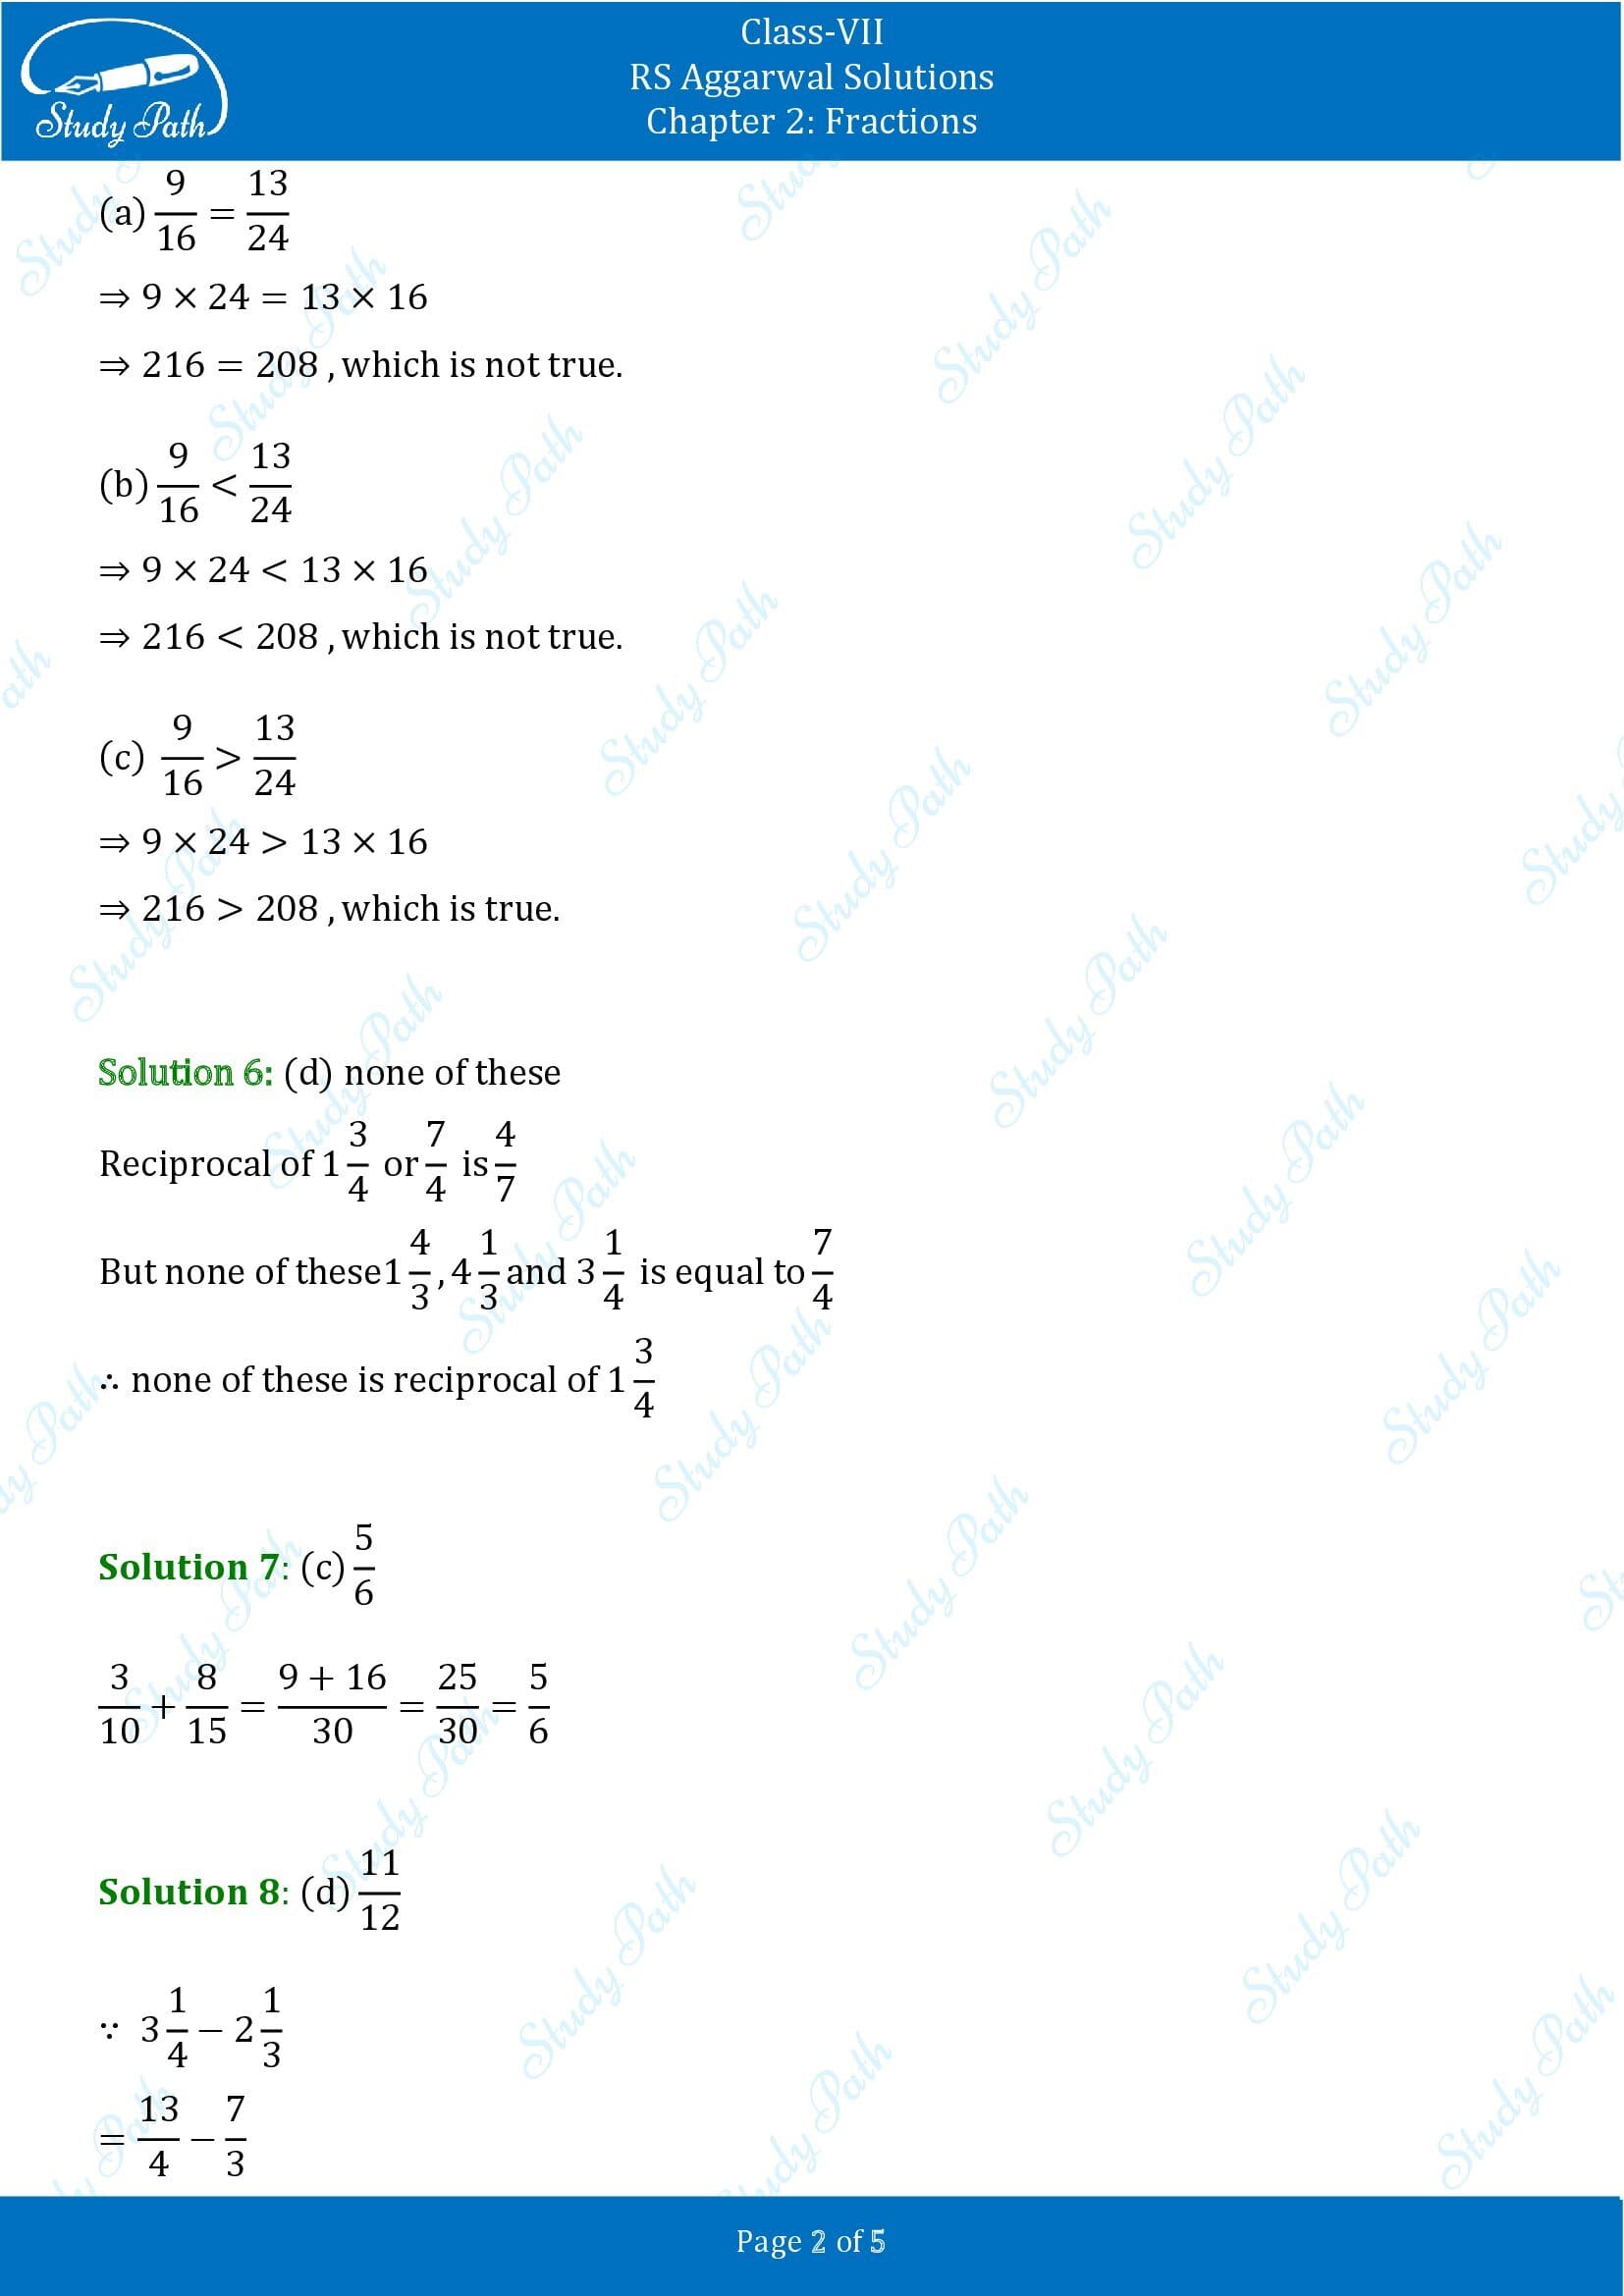 RS Aggarwal Solutions Class 7 Chapter 2 Fractions Exercise 2D MCQs 0002